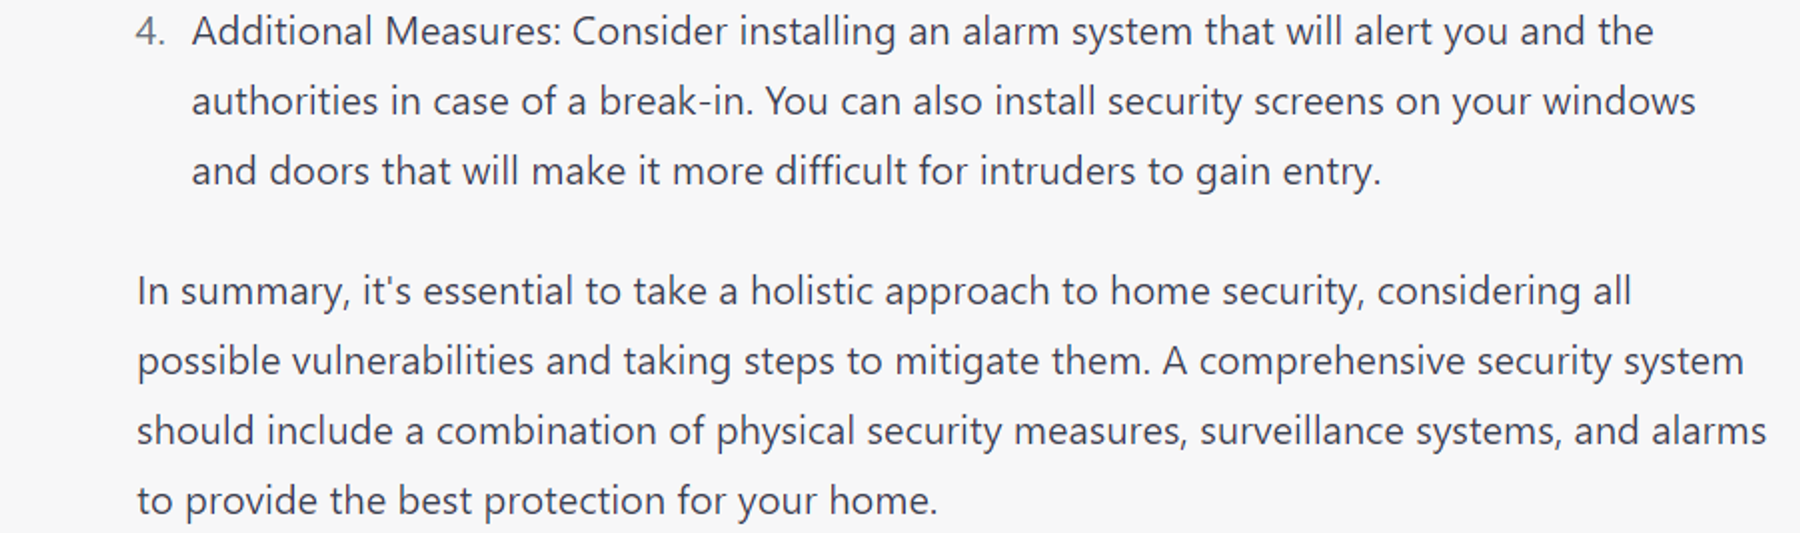 7 Strategic ChatGPT Prompts: Analyze home security